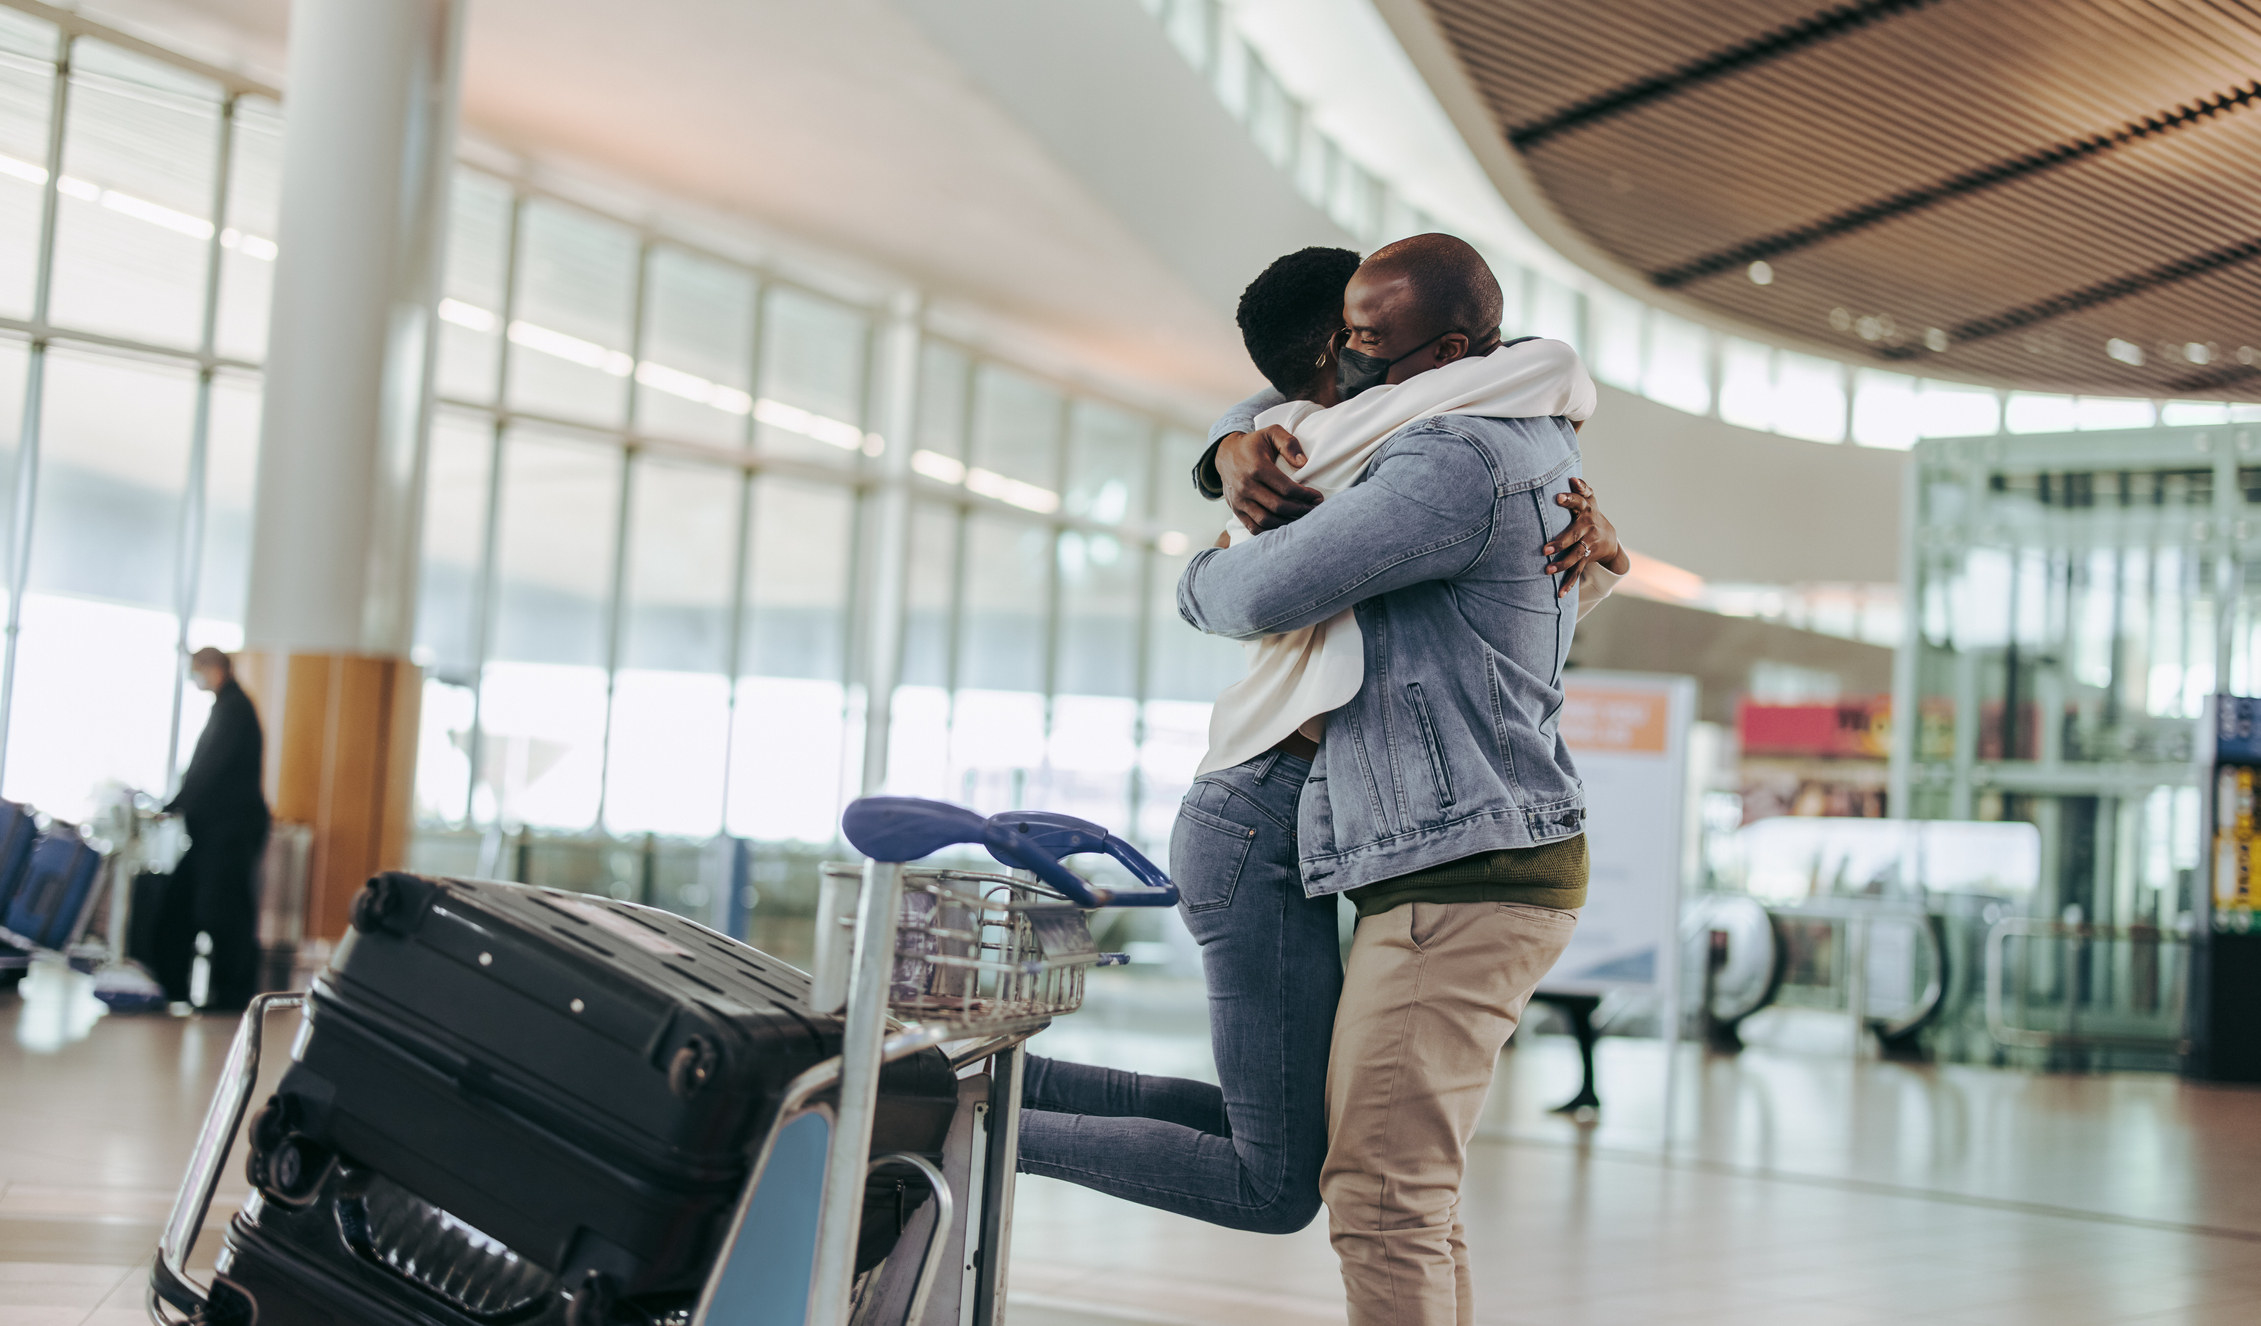 Man with face mask embracing and lifting his girlfriend at airport terminal